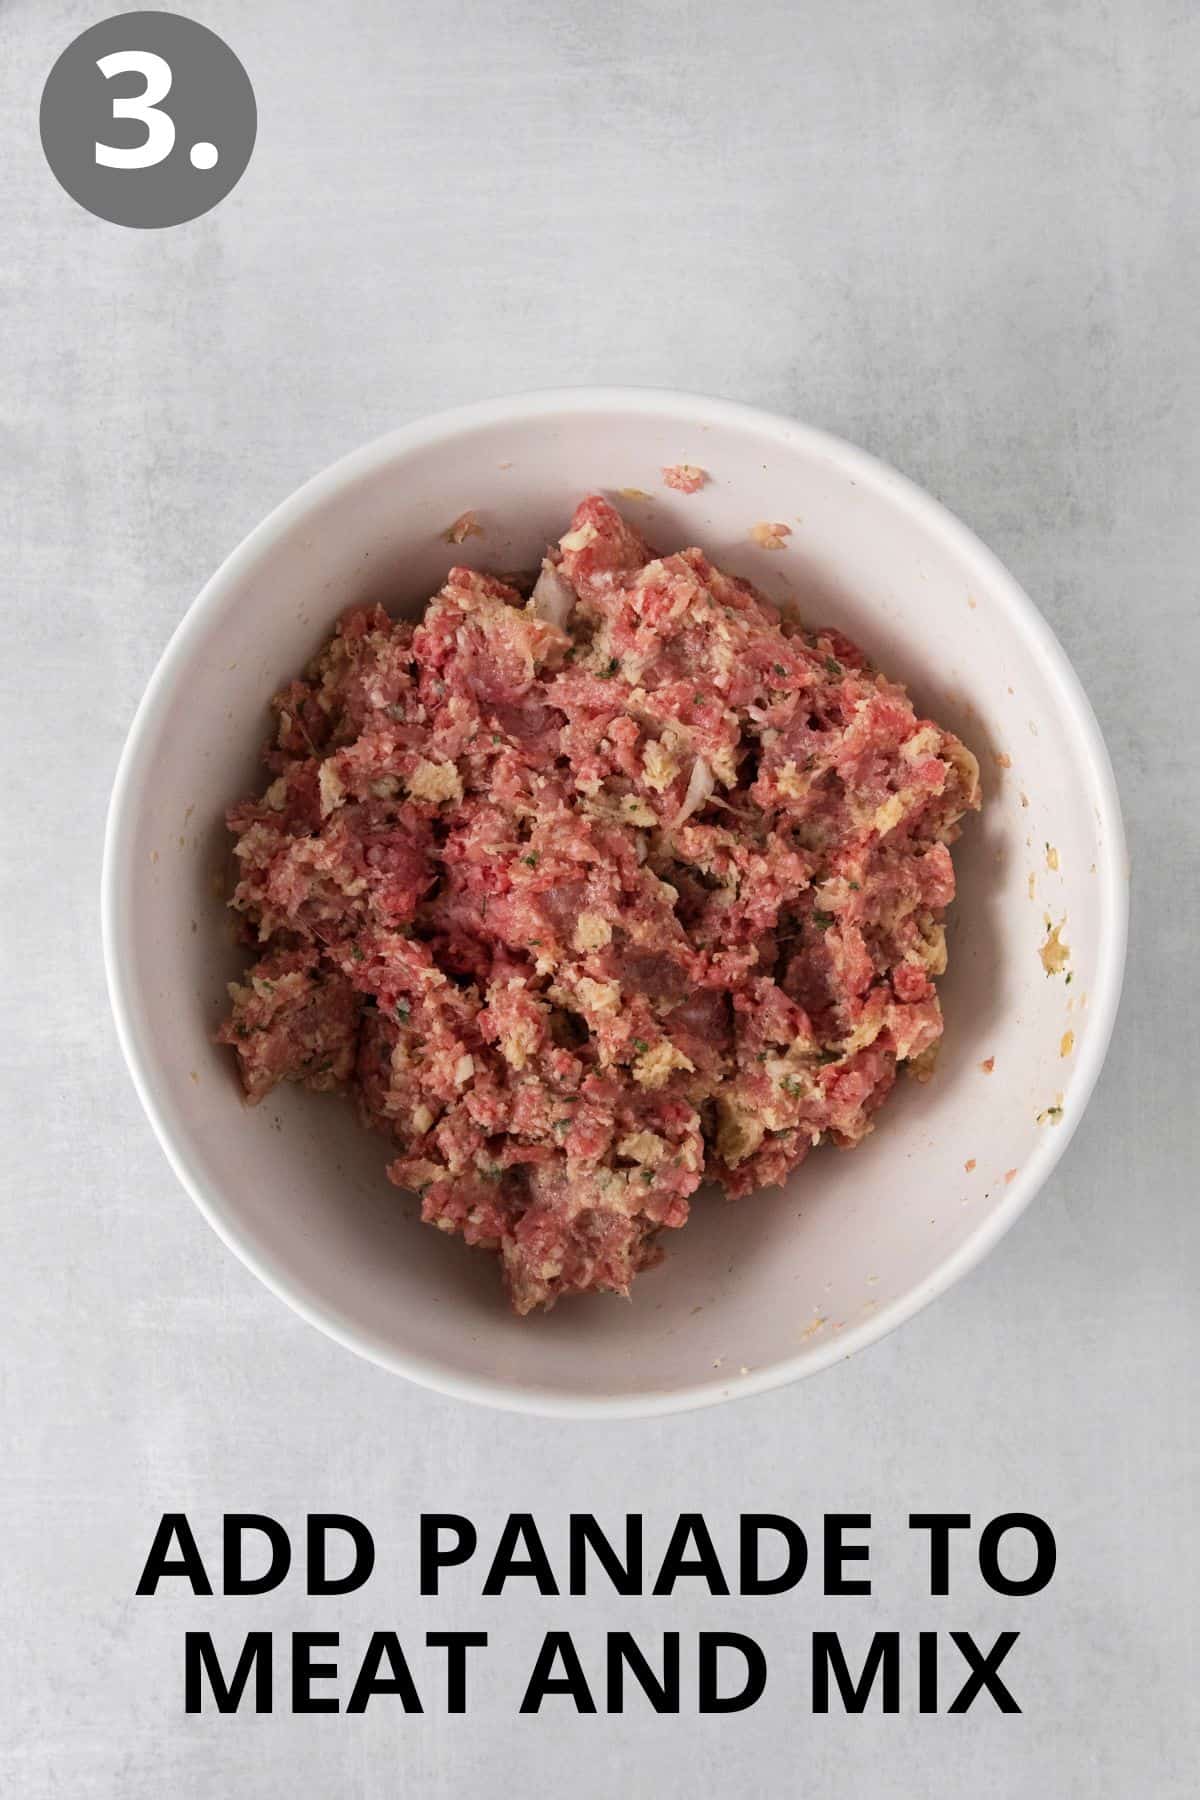 Meat and panade mixed together in a bowl